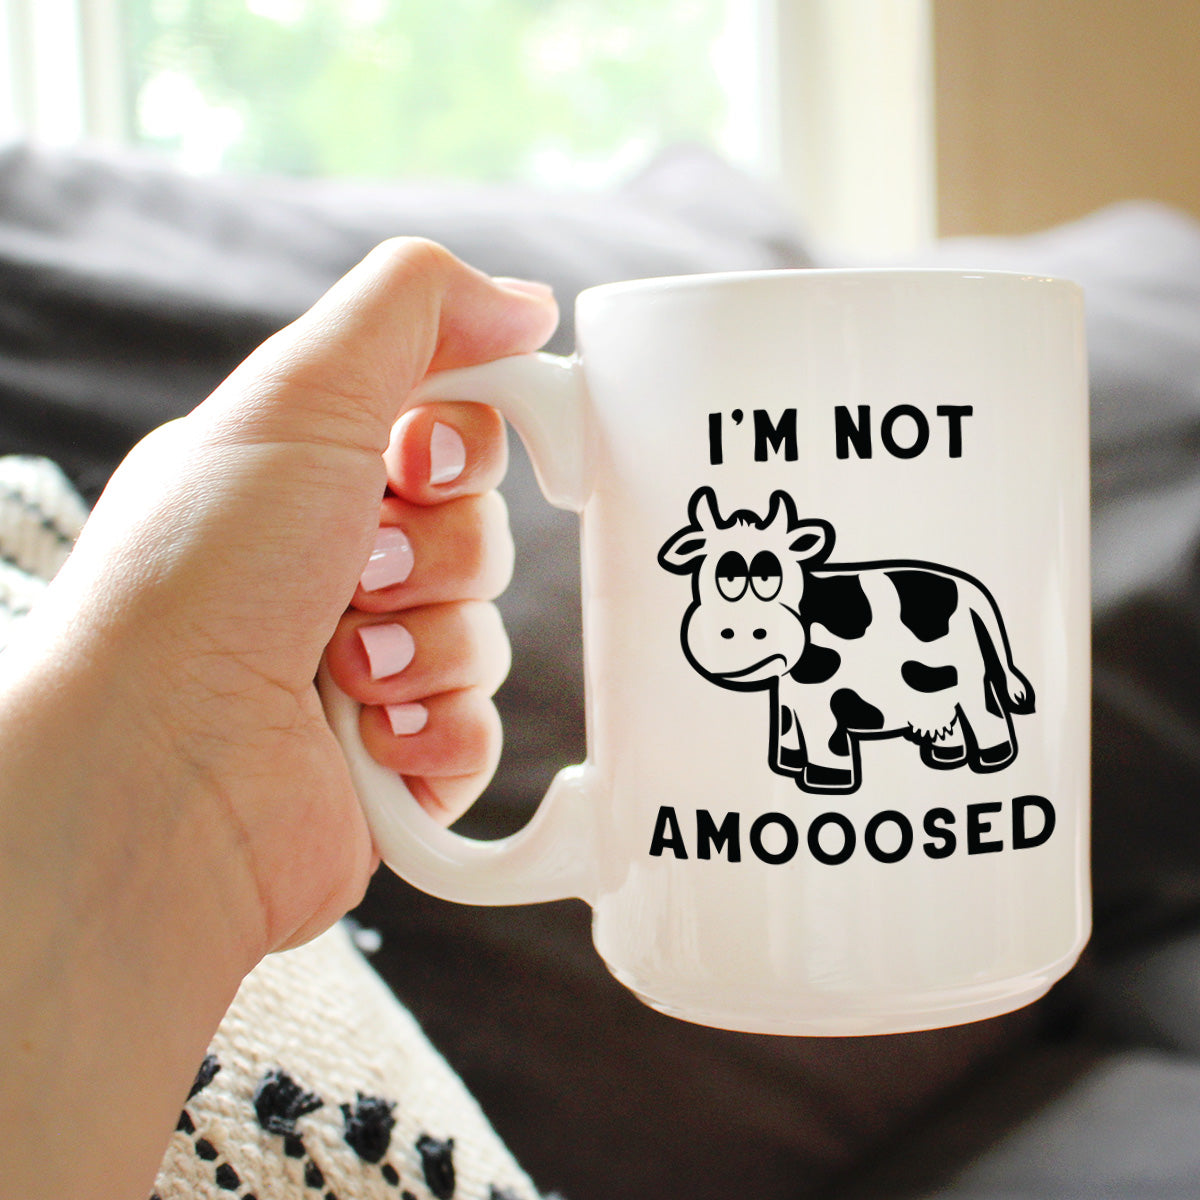 Not Amooosed - Cow Coffee Mug - Funny Cow Gifts and Decor